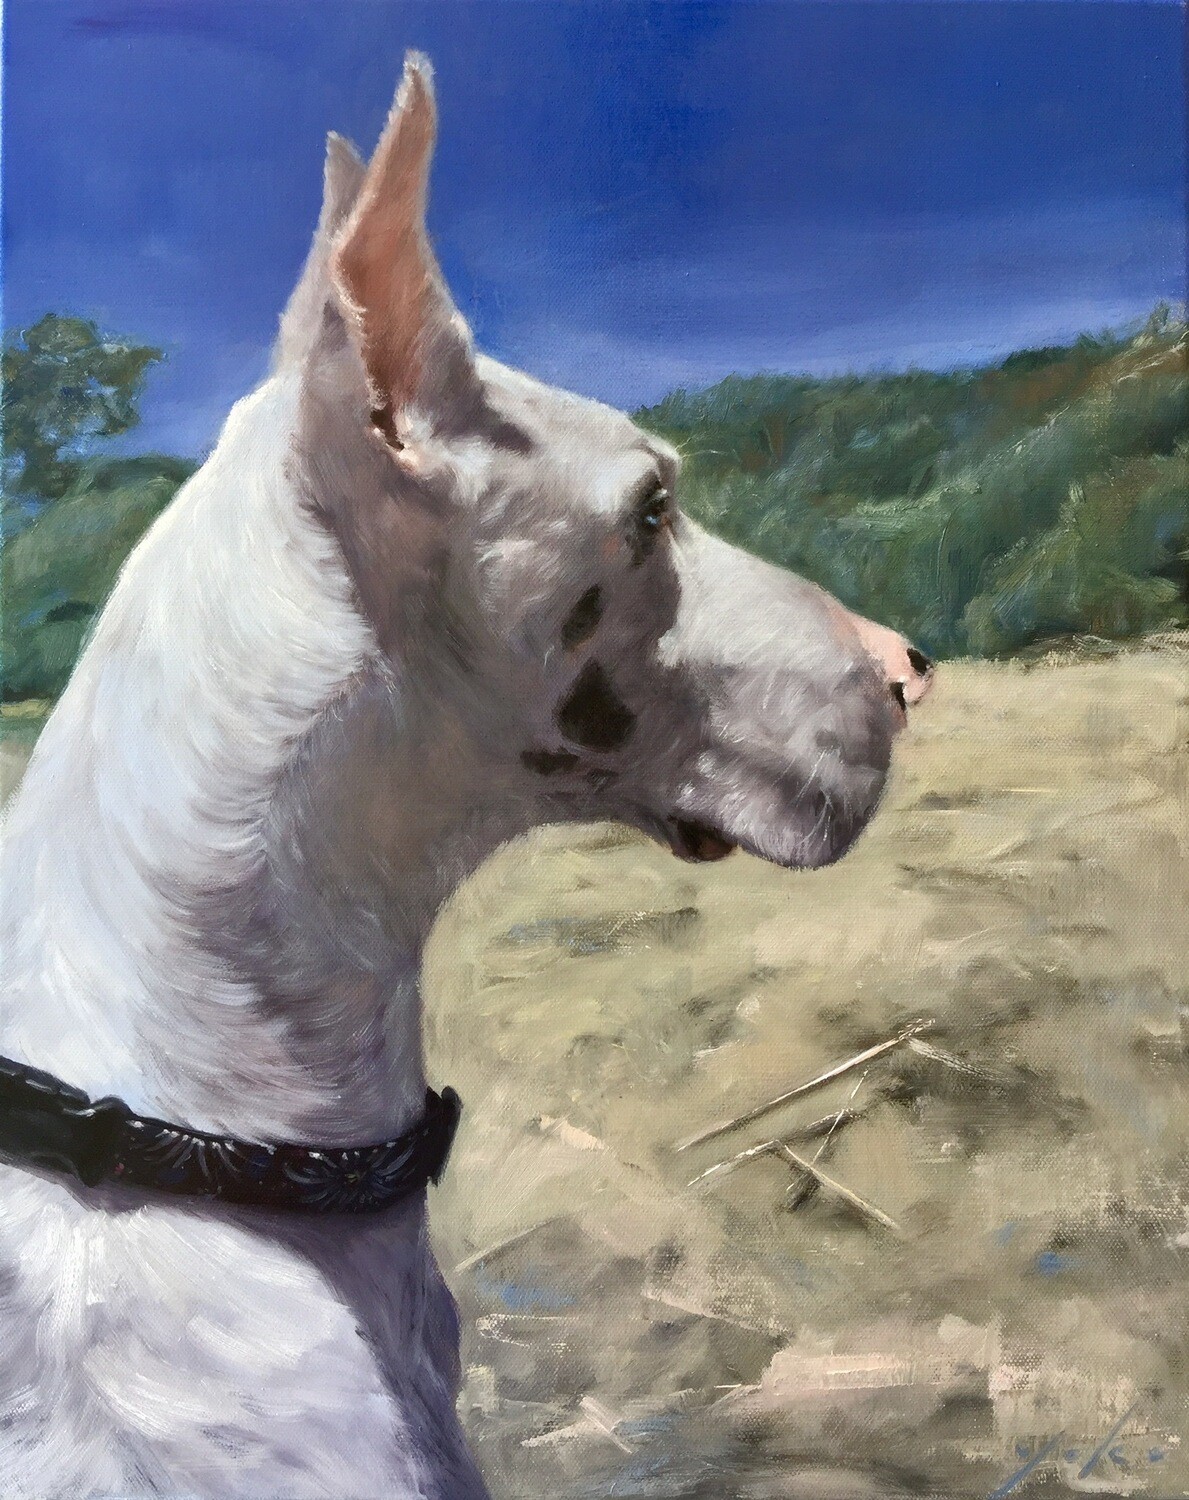 16x20 inch - Pet Custom Oil Portrait Painting from